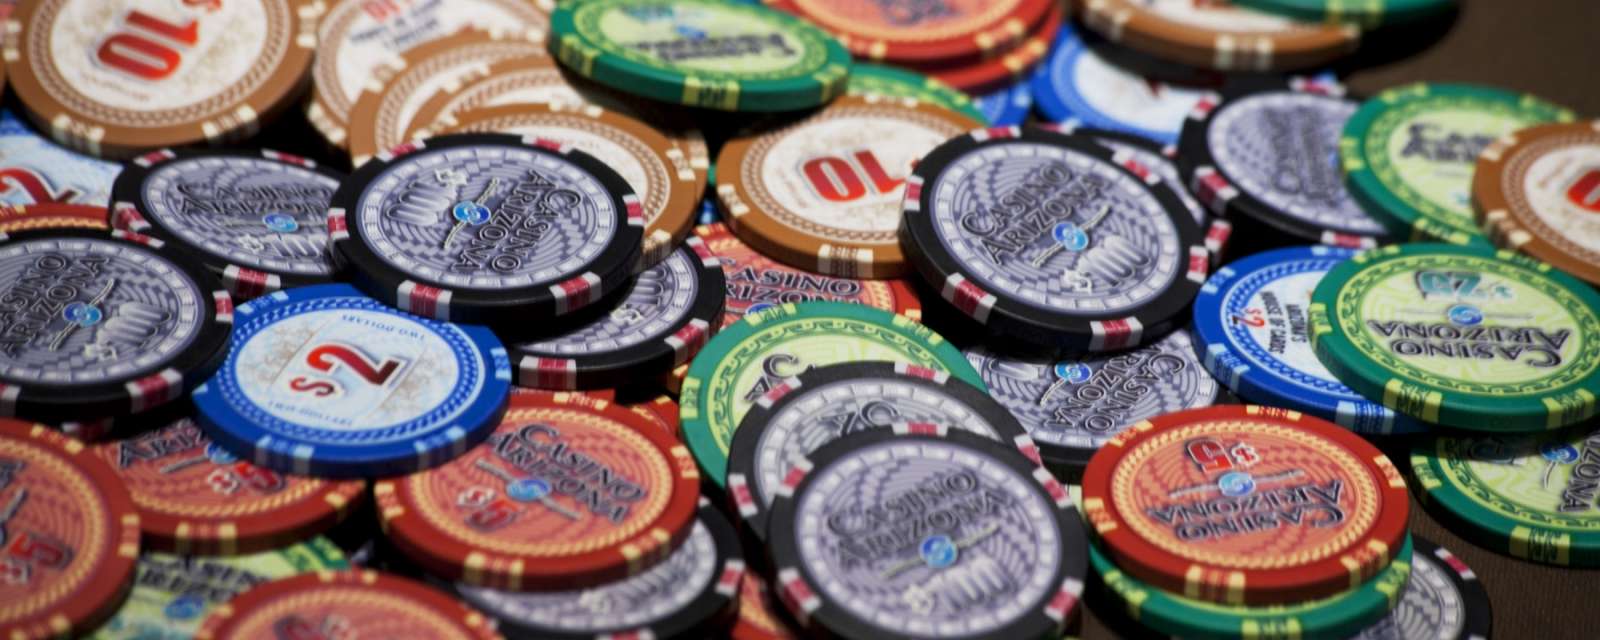 Image result for casino images